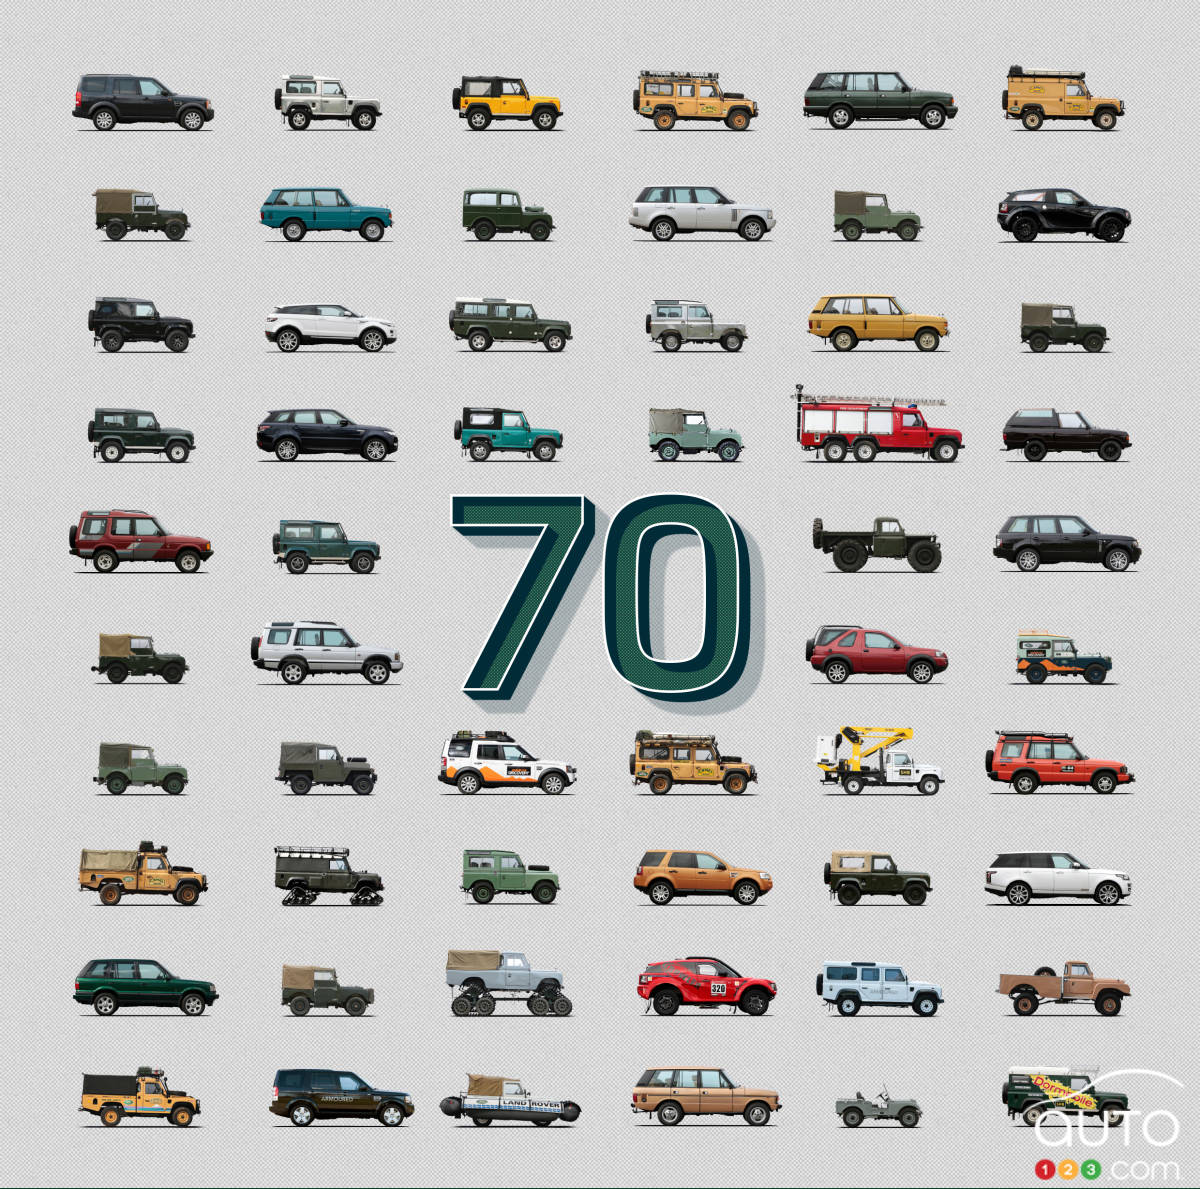 Land Rover Marks 70 Years of Existence with Web broadcast